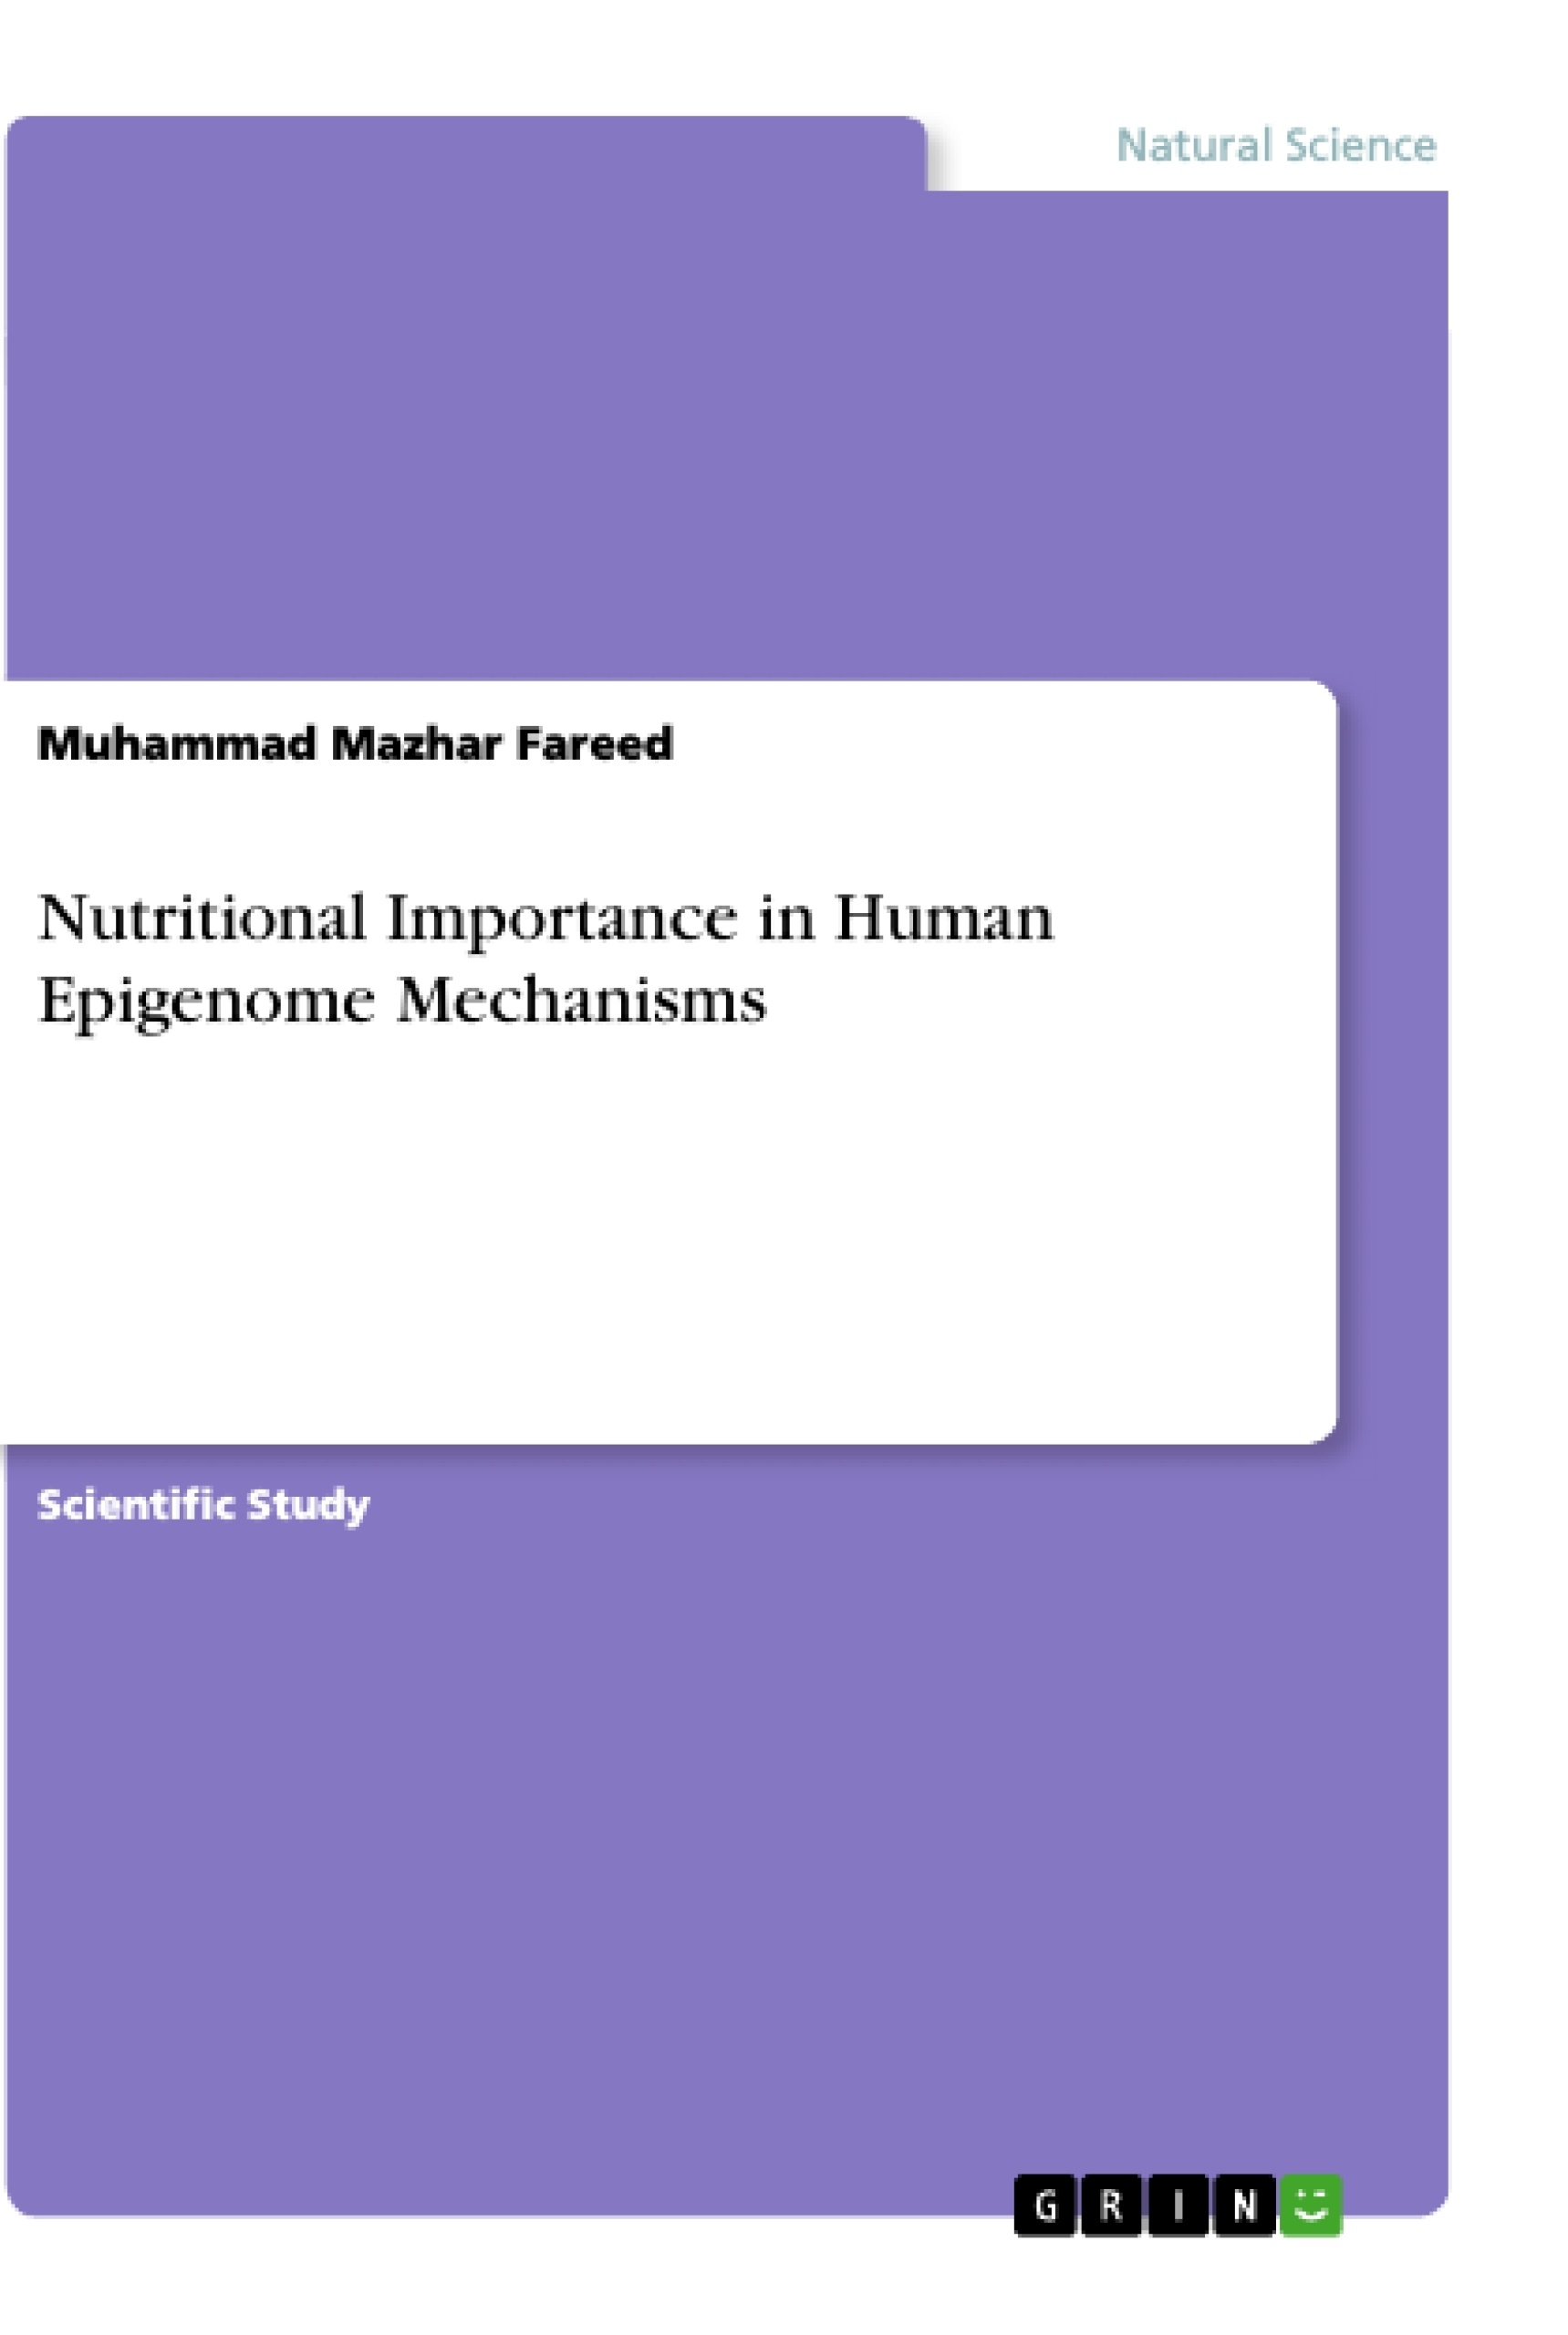 Title: Nutritional Importance in Human Epigenome Mechanisms